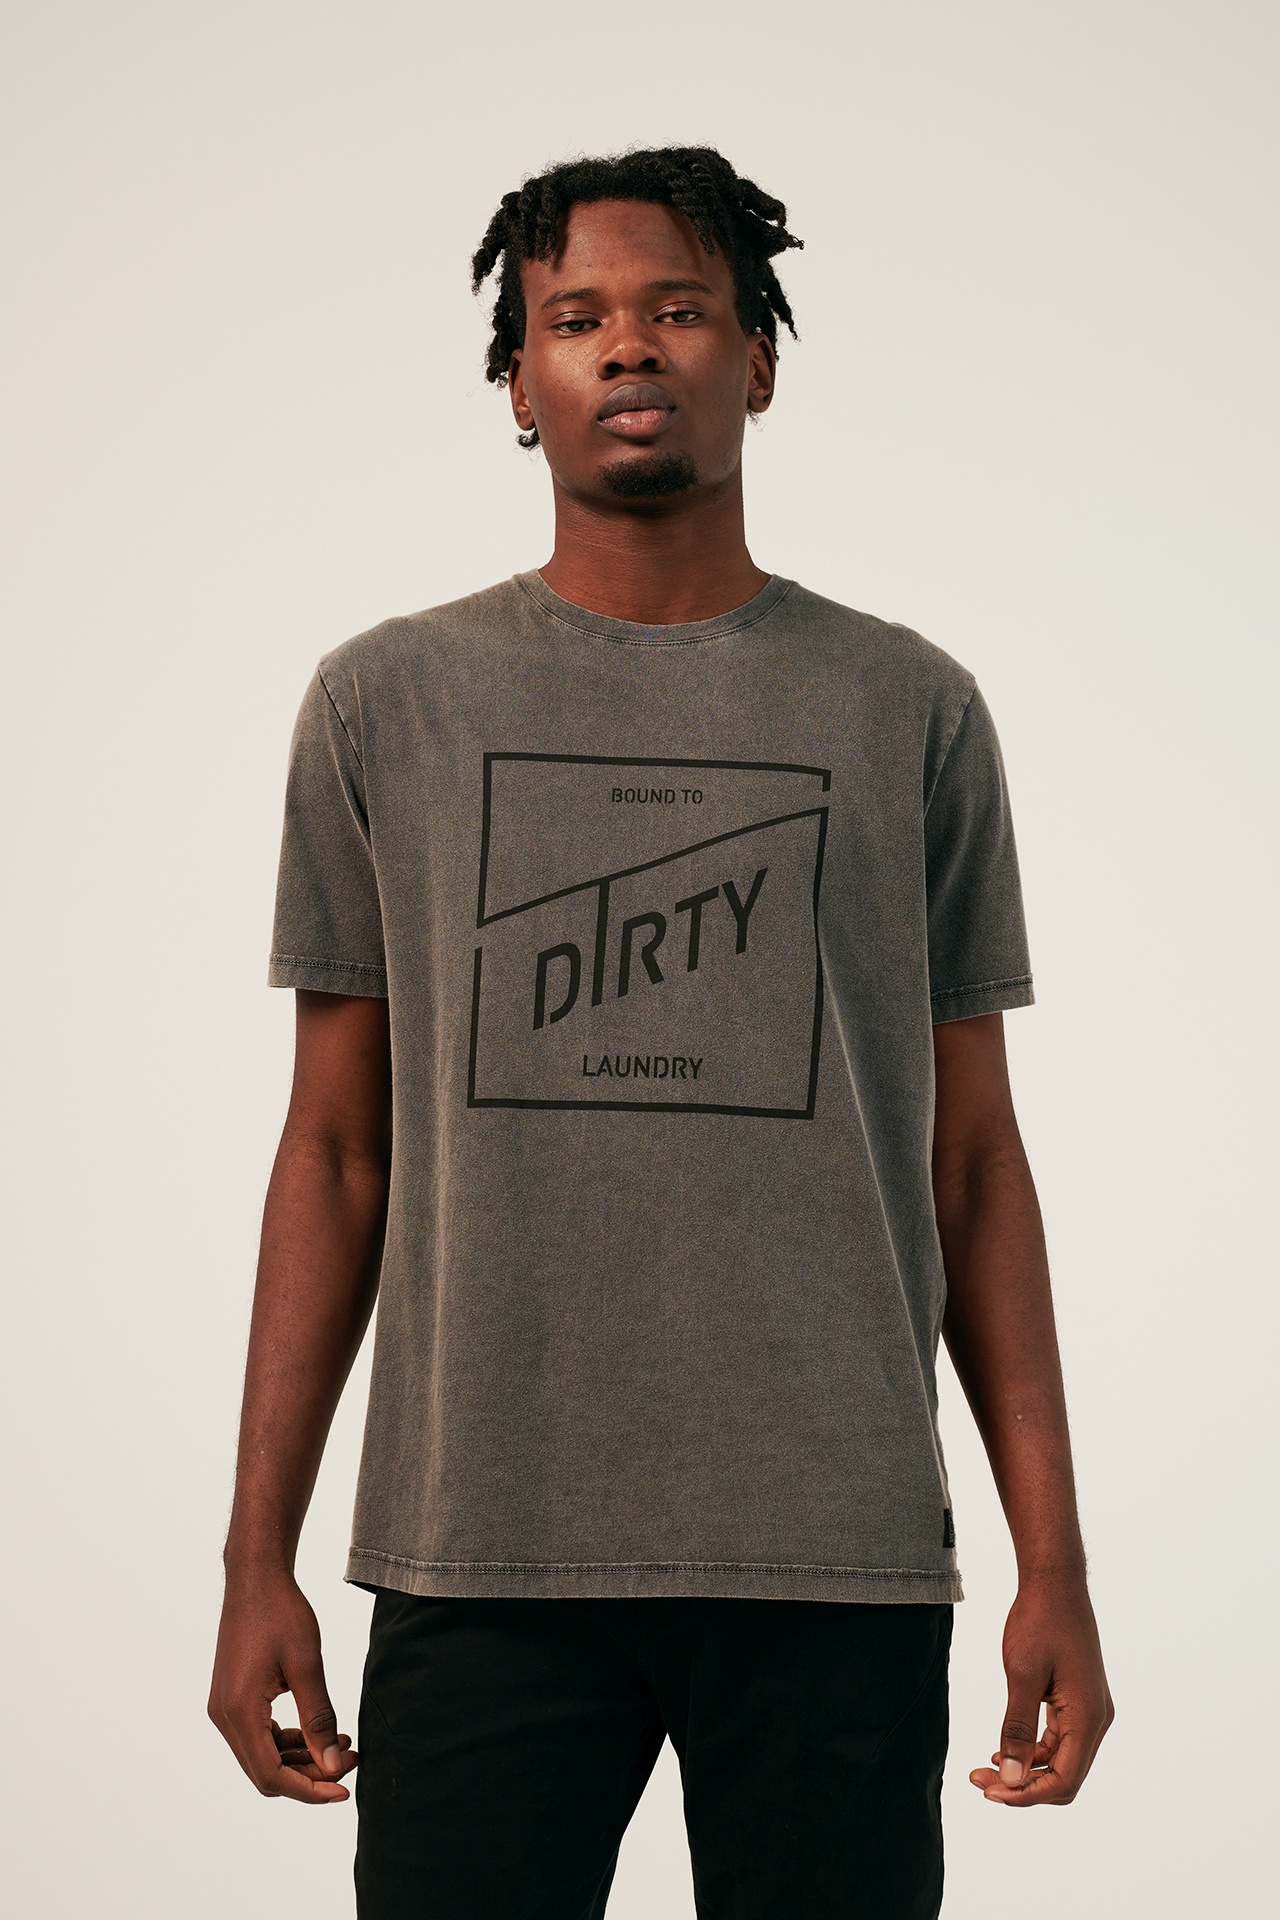 BOUND TO DIRTY TEE